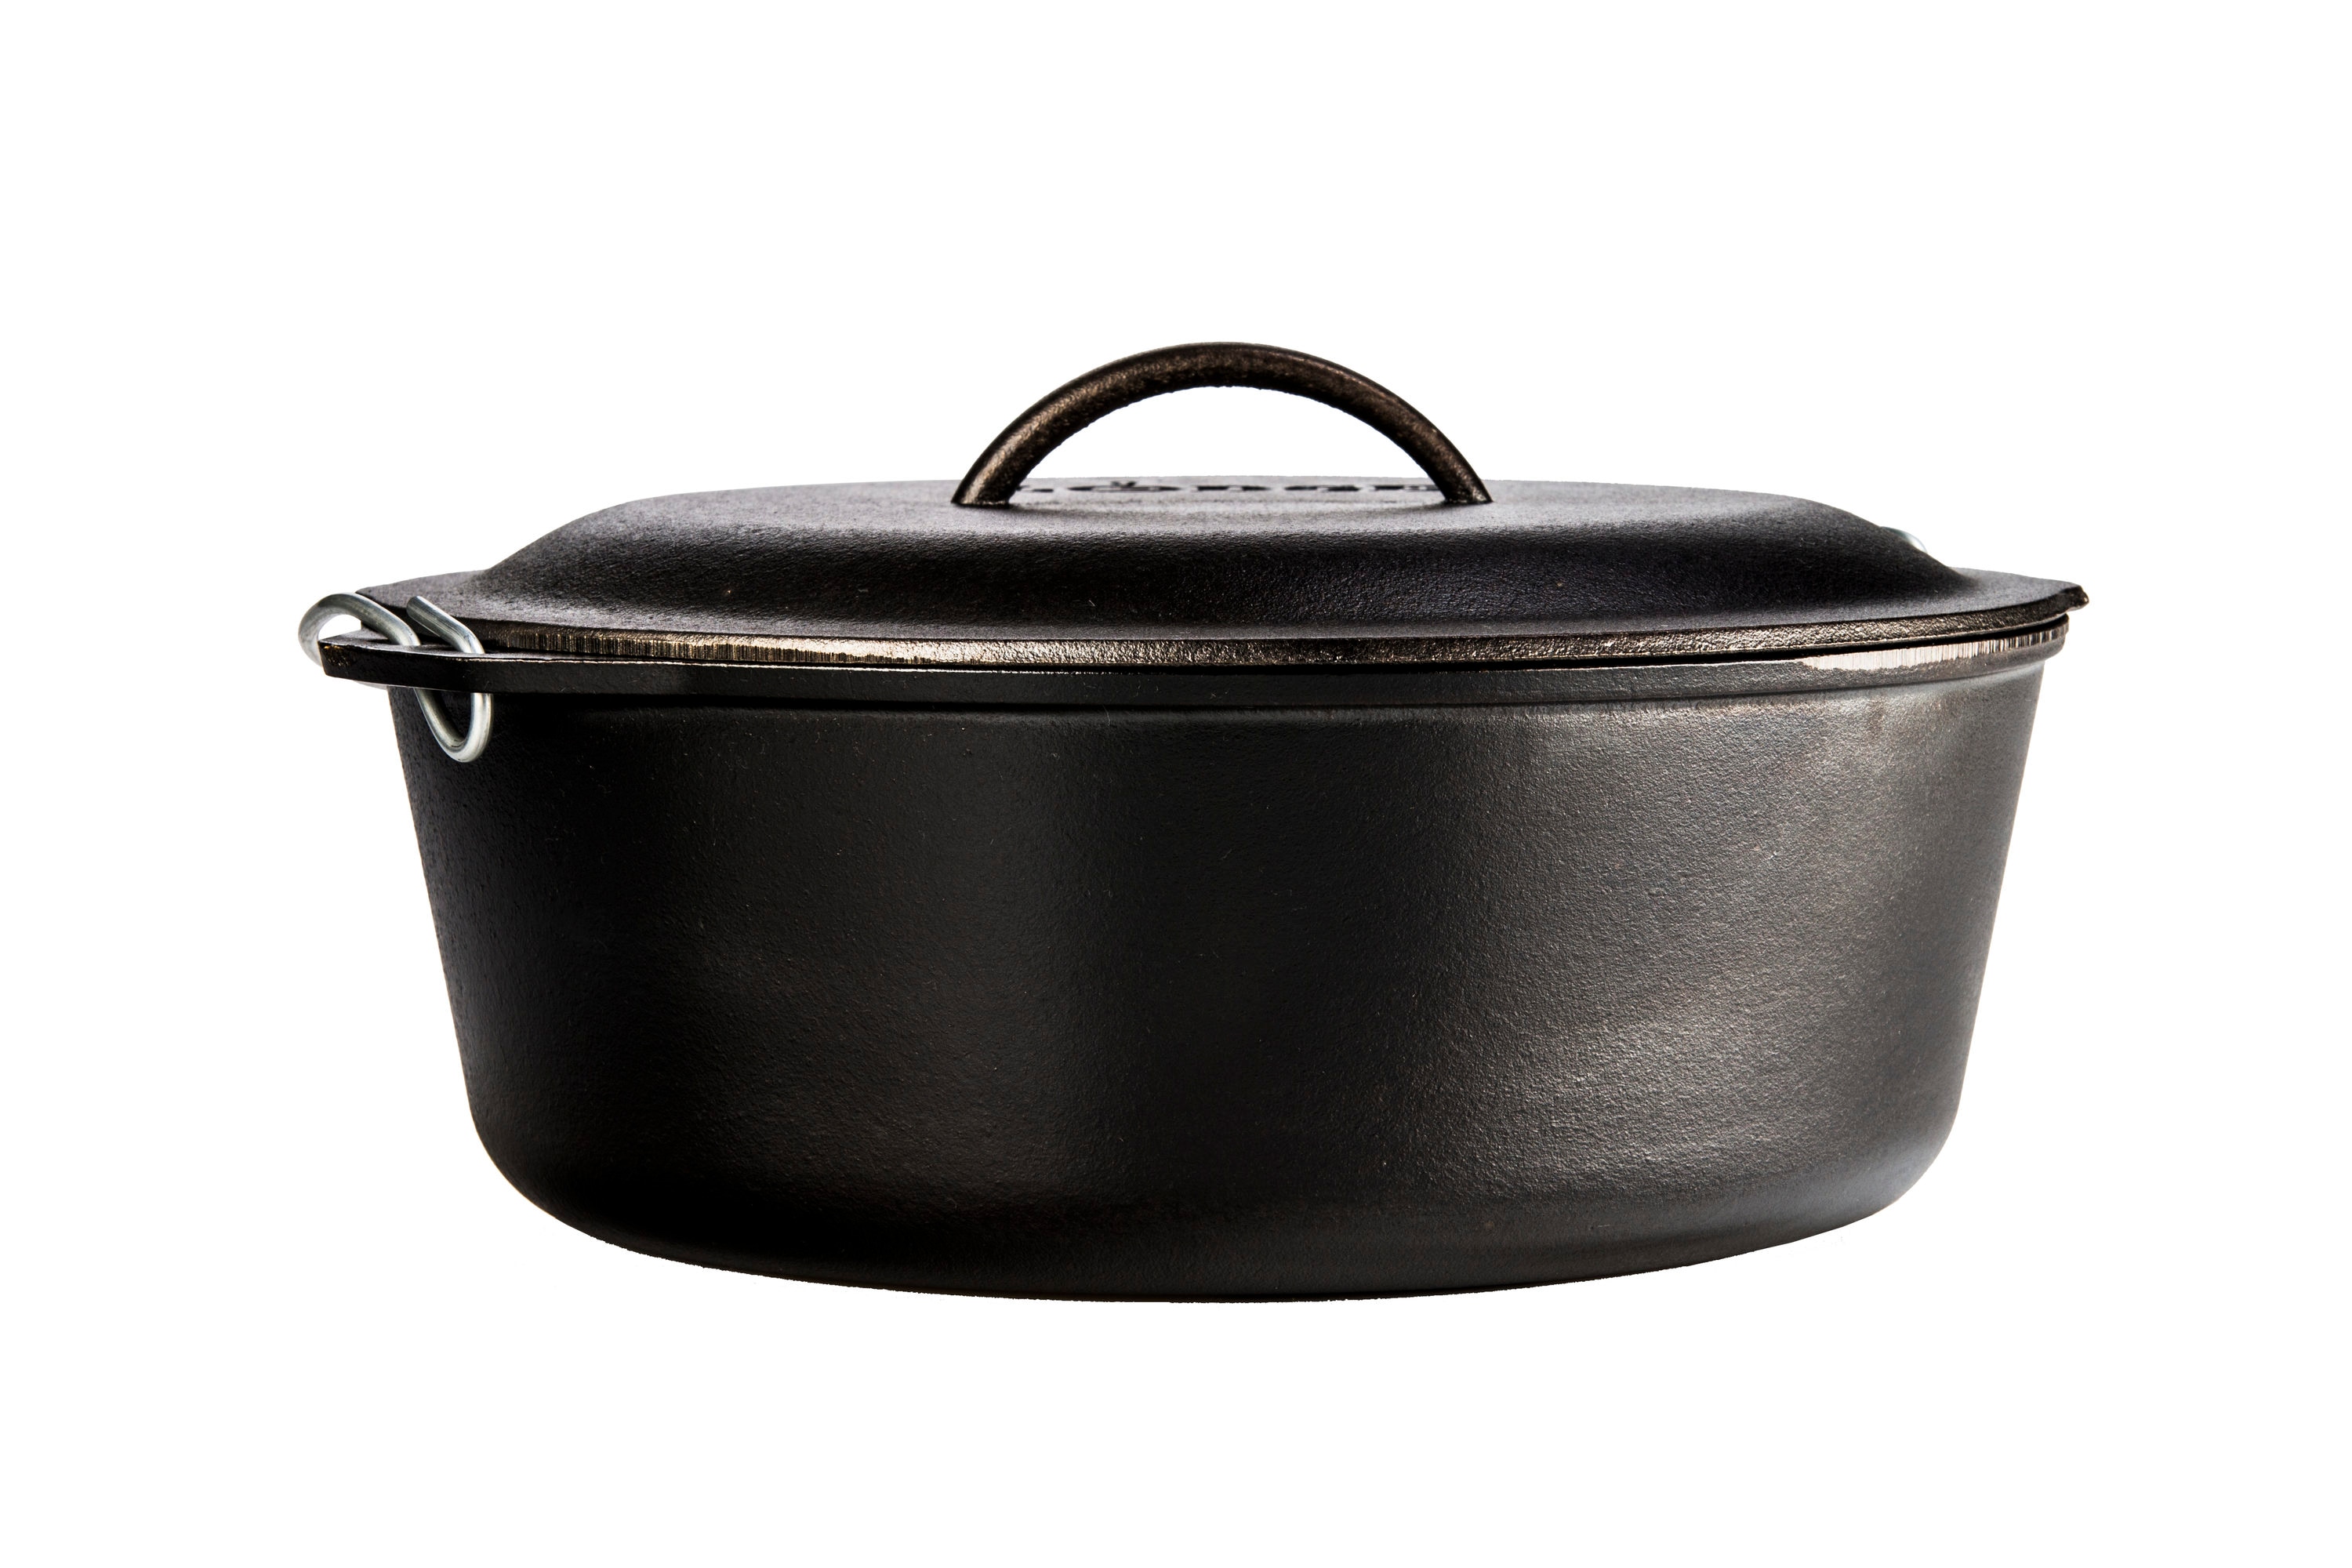 Stock Pot 5.5 Quart 3-Layer PFOA Free No-stick Coating Induction Compatible Dutch Oven with Tempered Glass Lid with 2 Soup Filters,6mm Forged Cast Aluminum Soup Pot Dishwasher Safe 